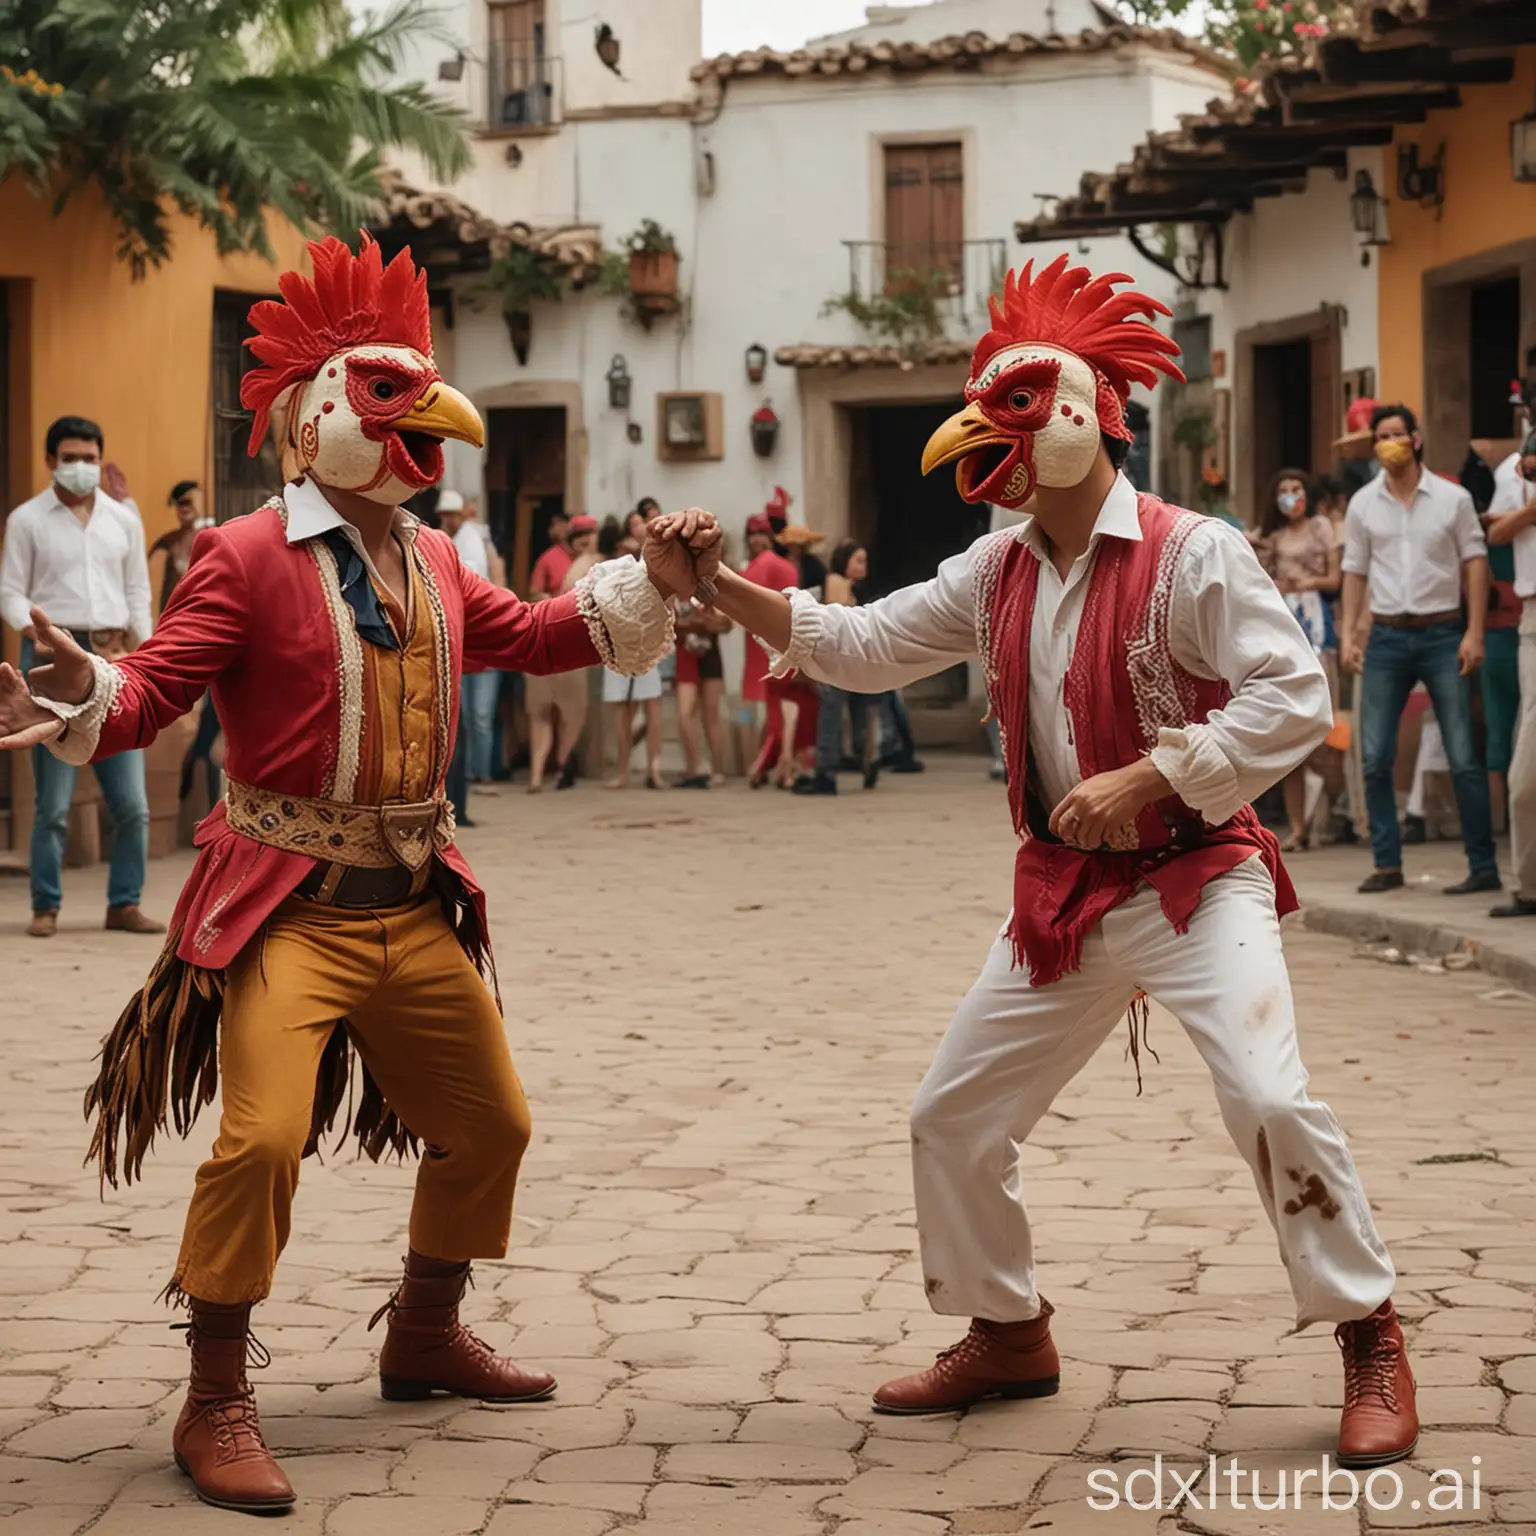 2 actors perform passionately in a picturesque Mexican-style cockfighting plaza with funny rooster masks, everyone claps happily